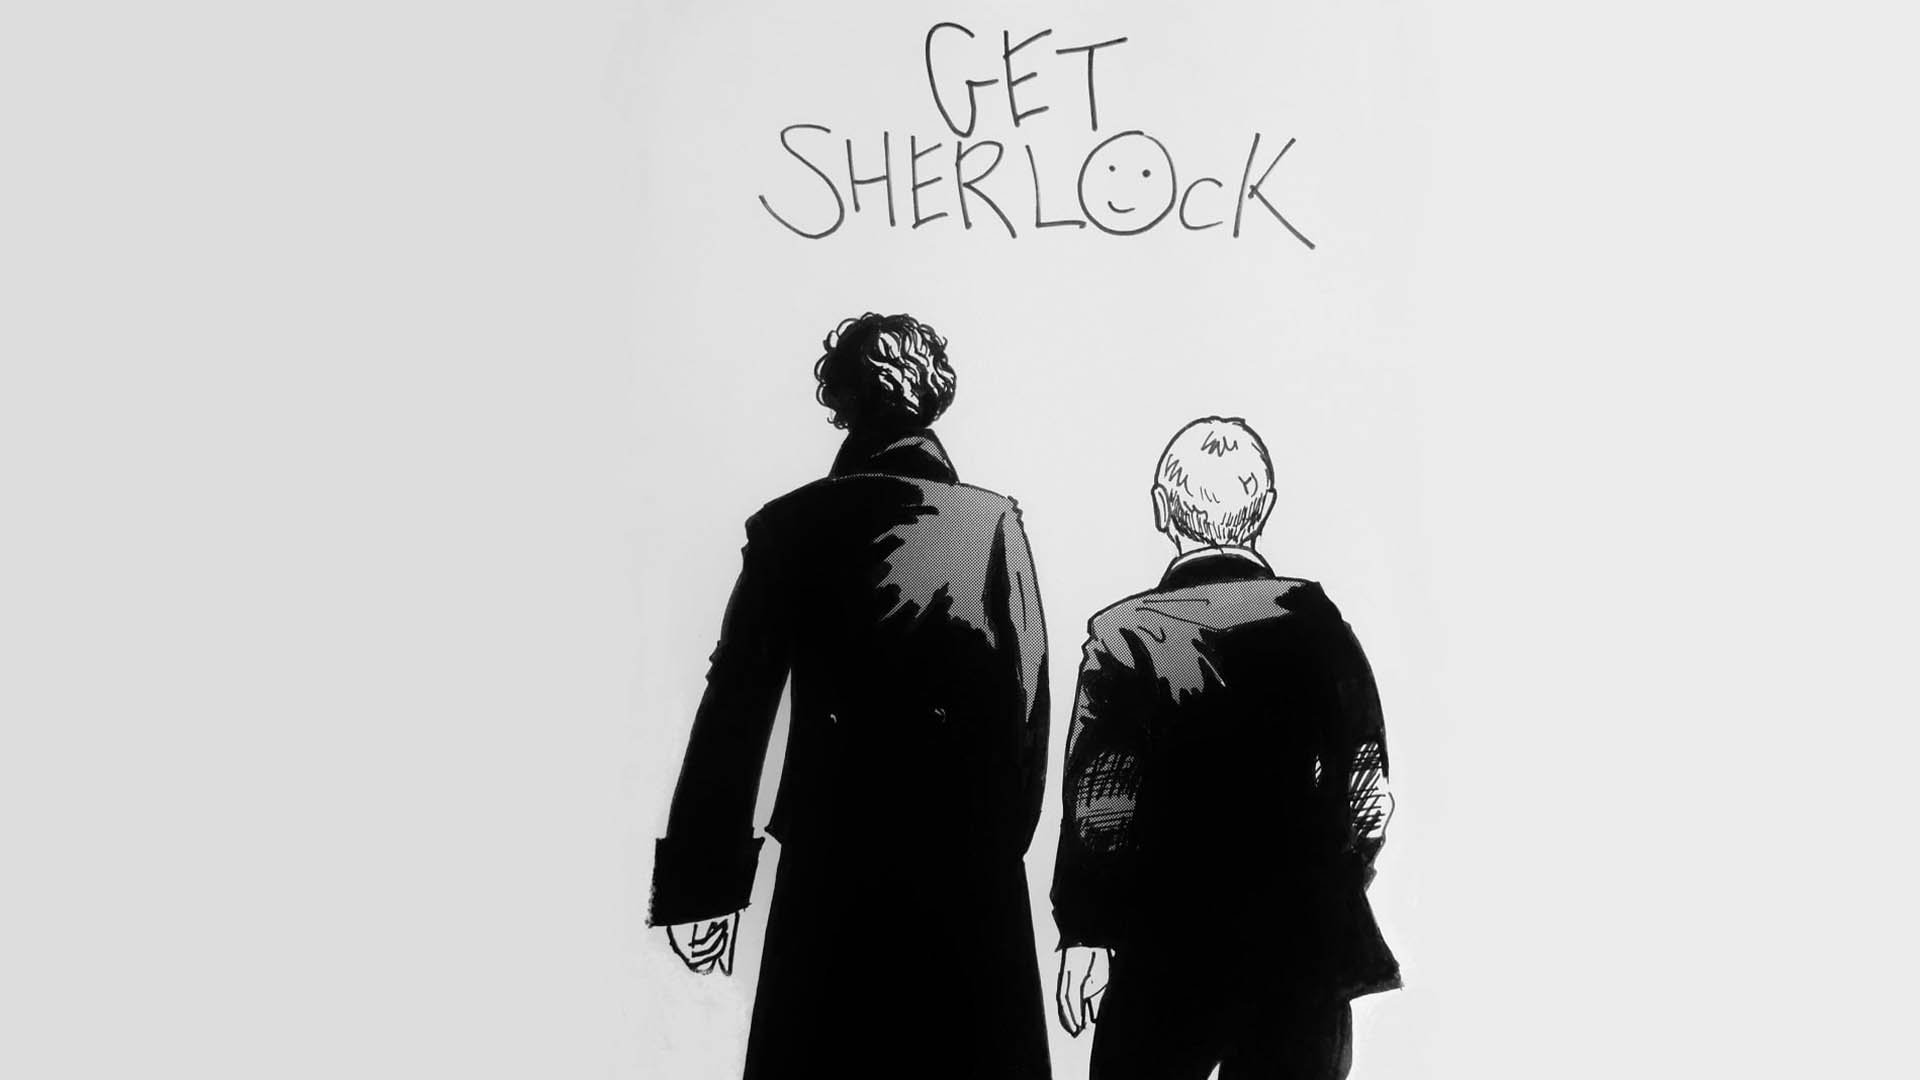 Sherlock fan art with a behind-the-scenes view of the main characters